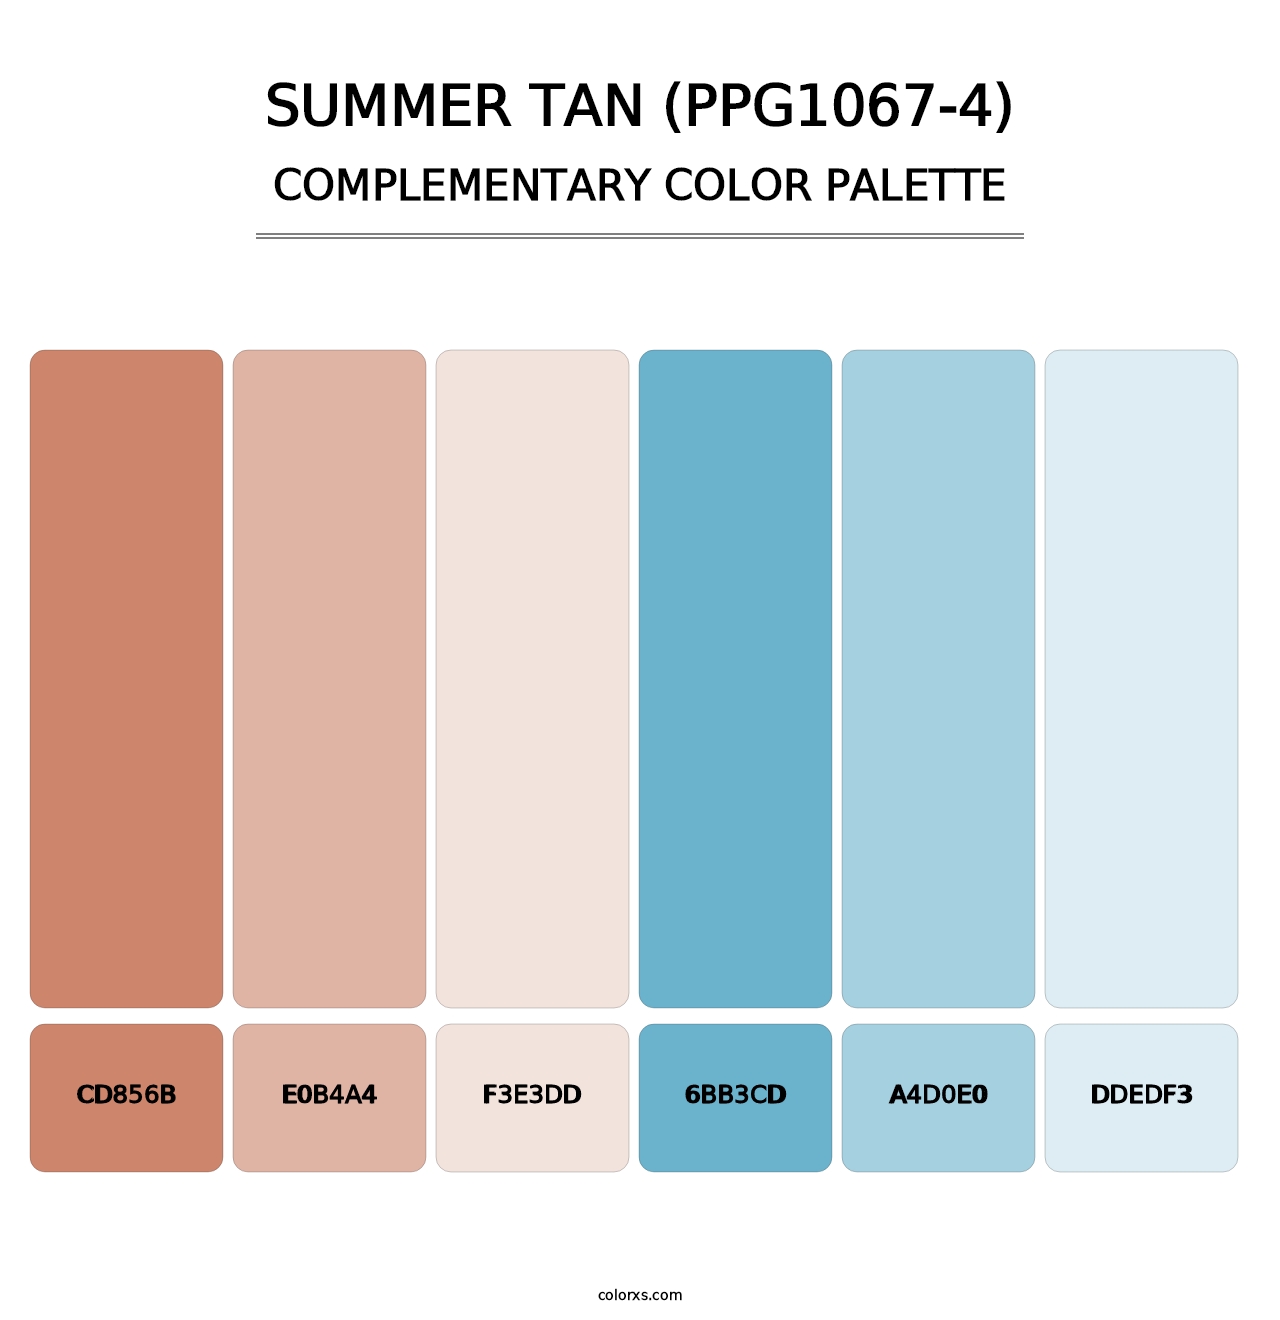 Summer Tan (PPG1067-4) - Complementary Color Palette